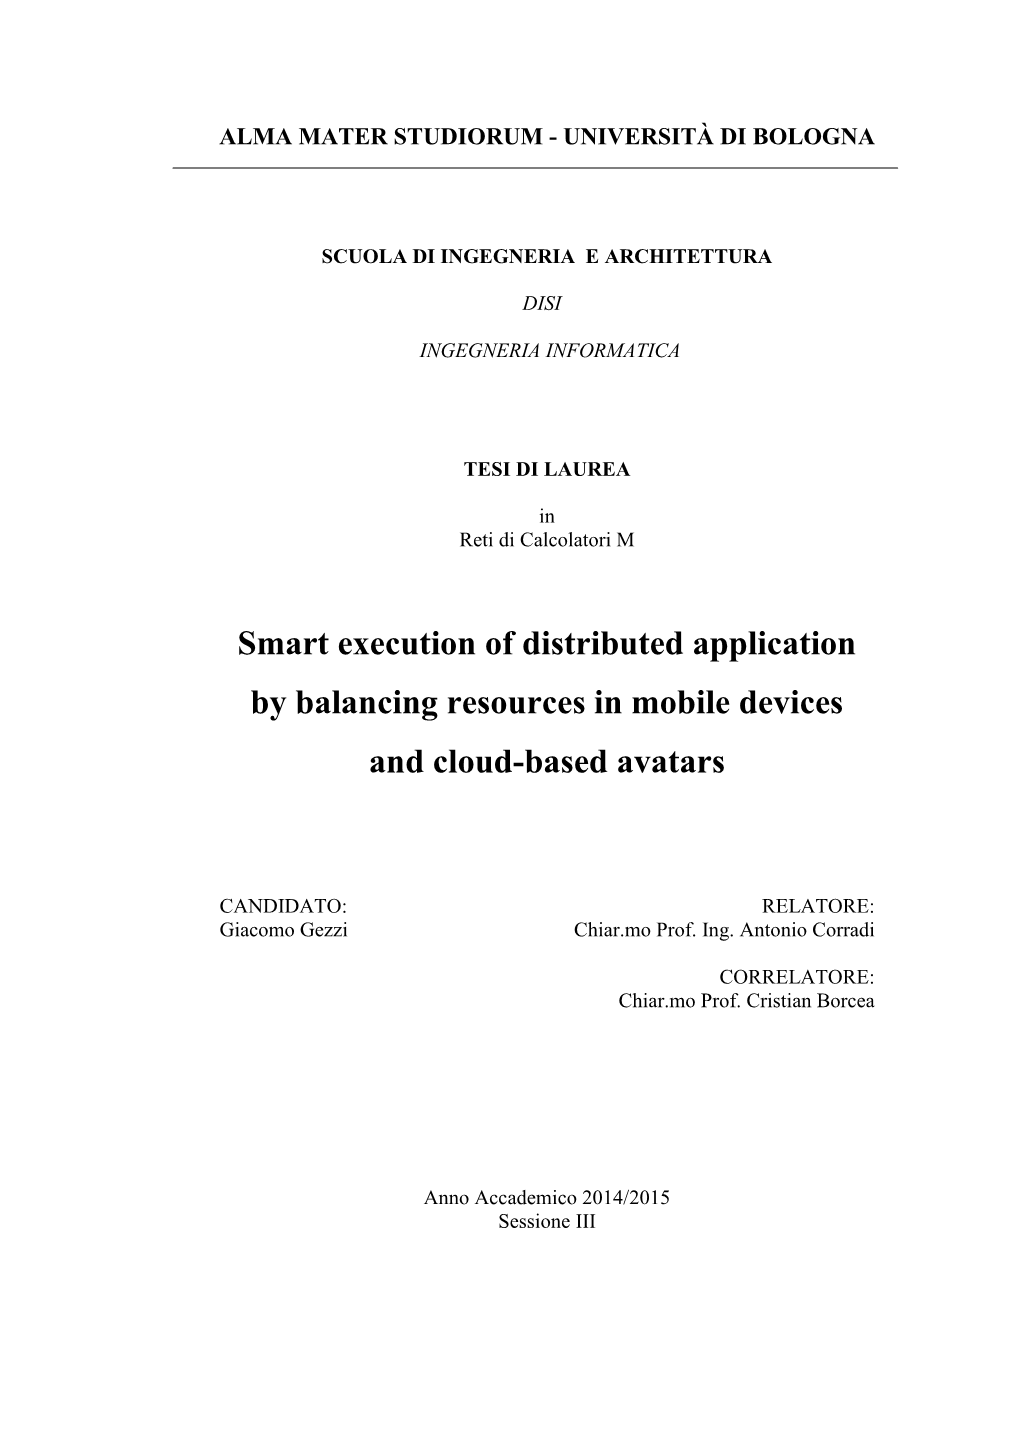 Smart Execution of Distributed Application by Balancing Resources in Mobile Devices